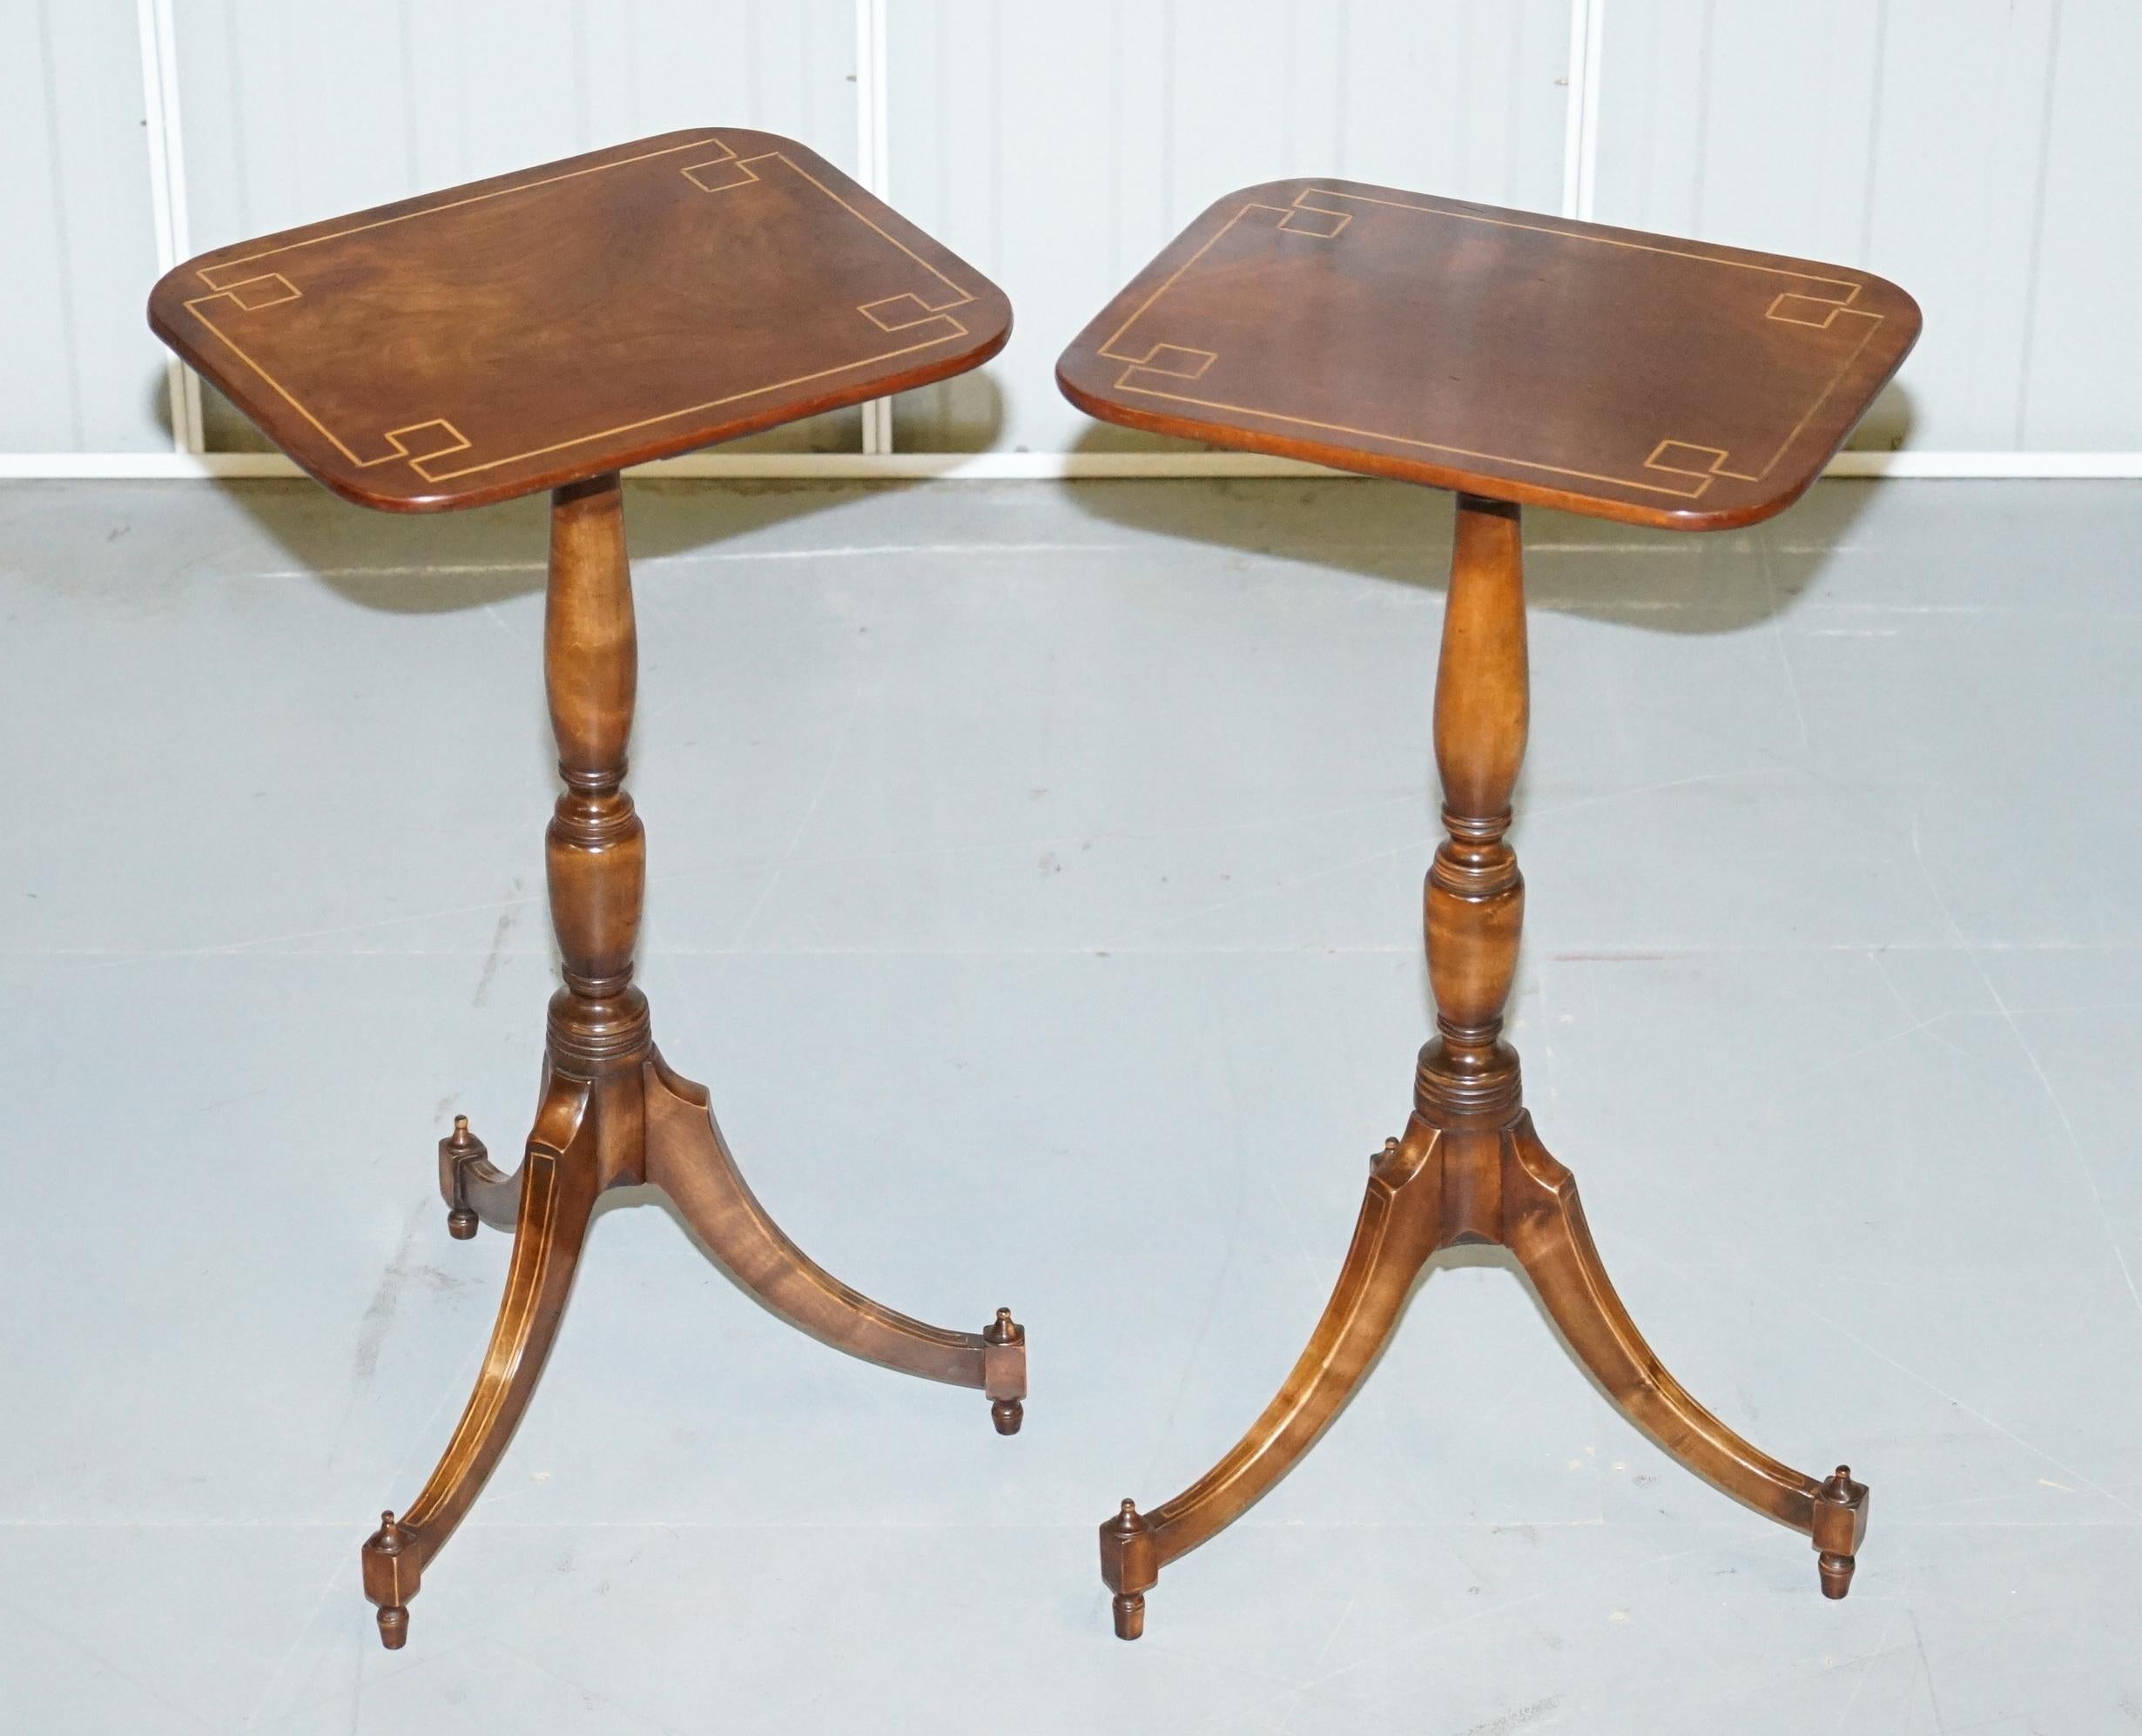 We are delighted to offer for sale this stunning pair of flamed walnut with box wood inlay lamp side tables

I have two pairs of these, the other pairs are slightly larger and listed under my other items

They are a very good looking well made